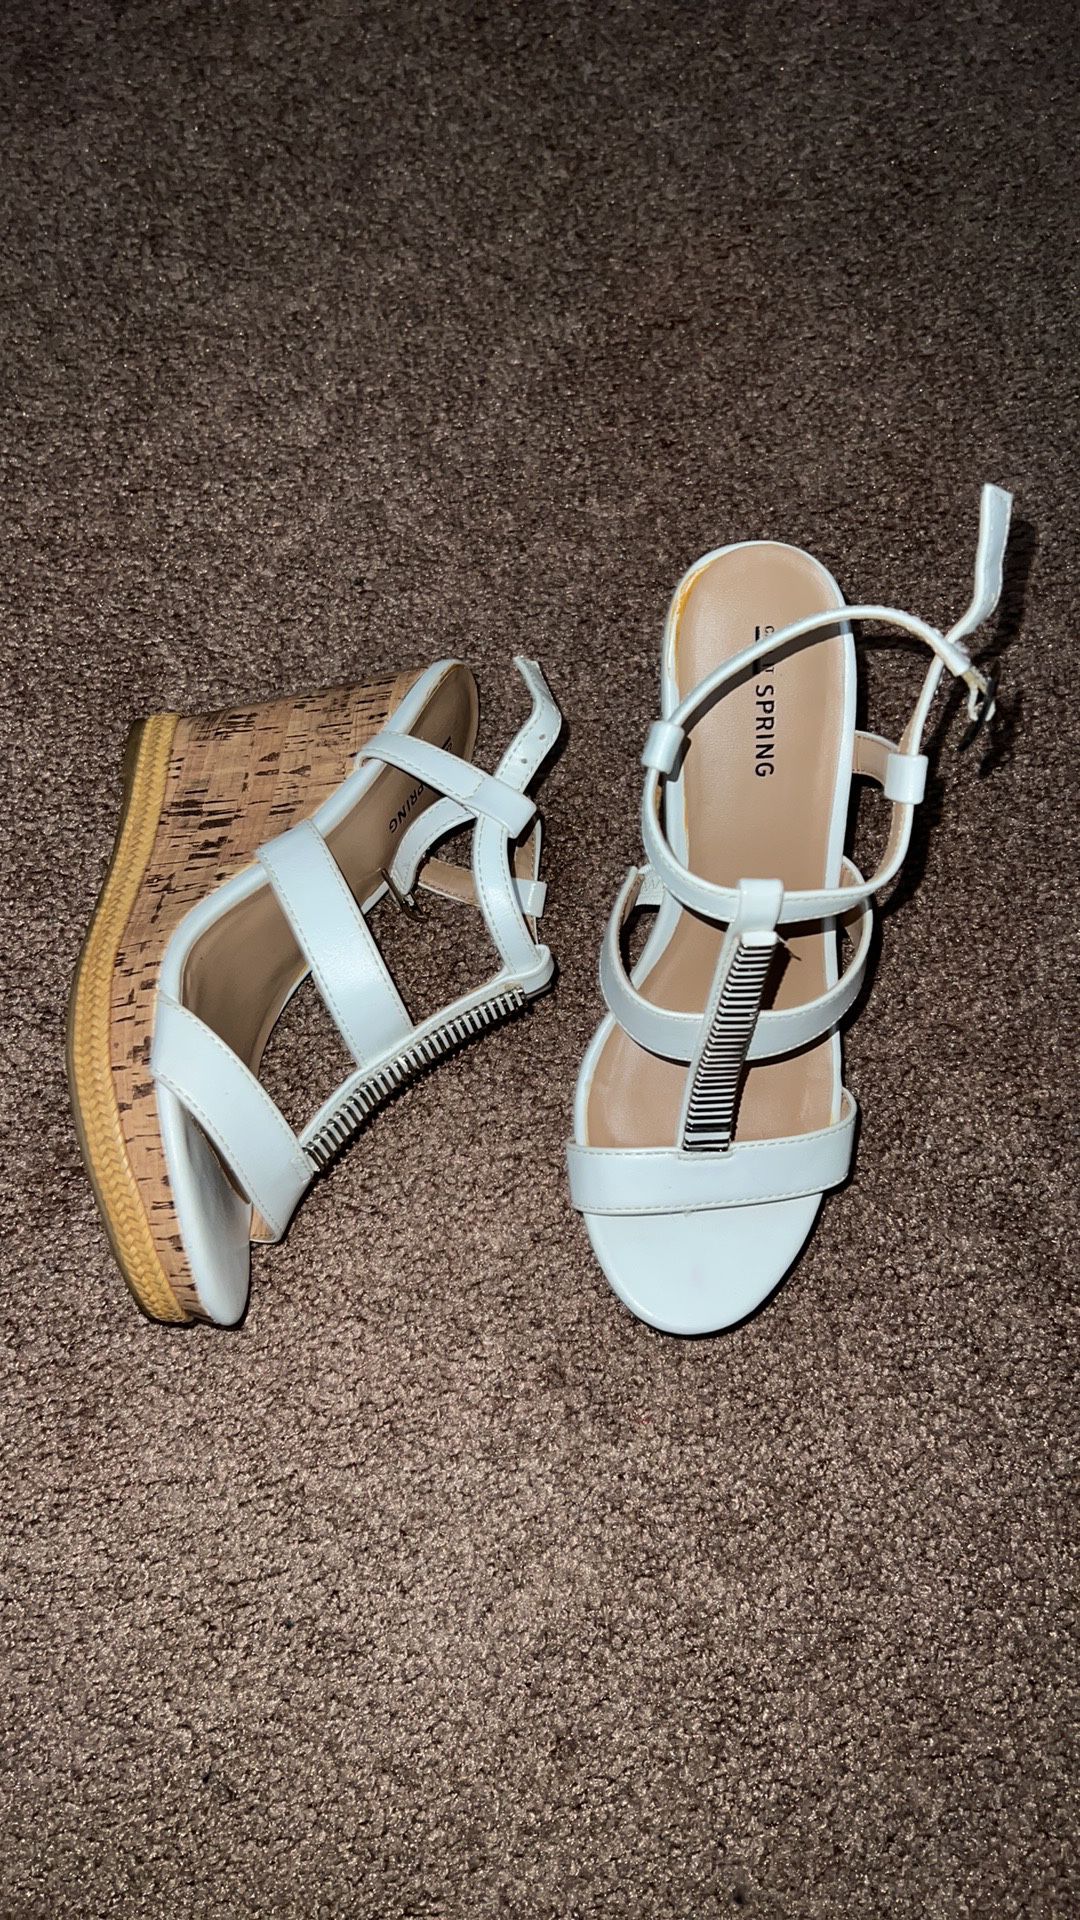 Call it Spring, wedges, 4.5" high wedge, white, size 6.5